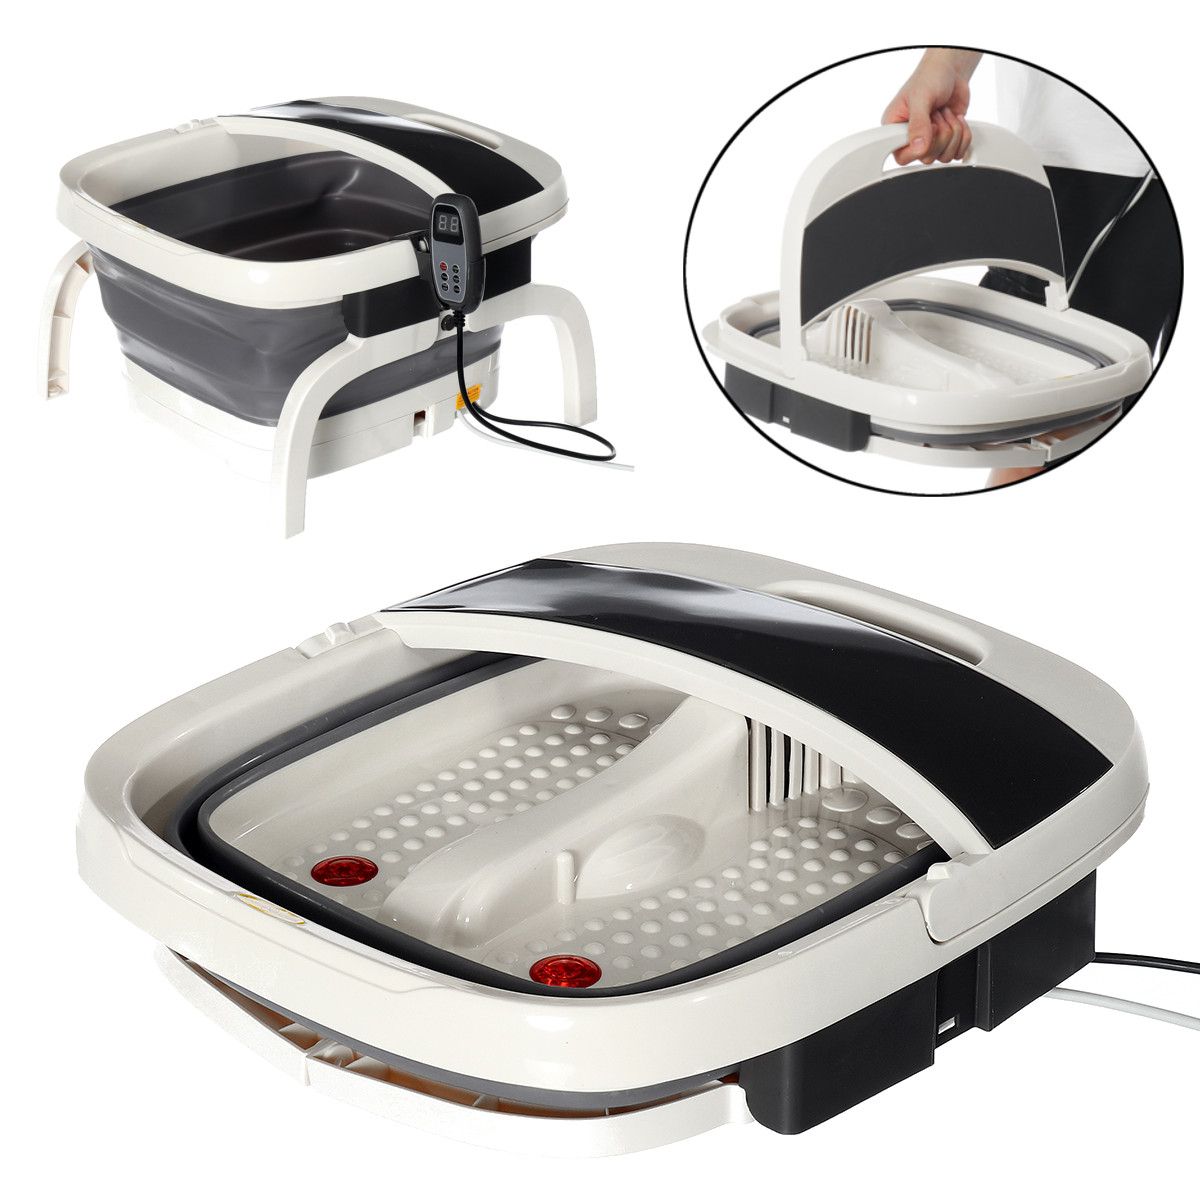 Foldable-Foot-Spa-Relax-Bath-Massager-Machine-Electric-Heating-Tub-Wired-Remote-Control-1602824